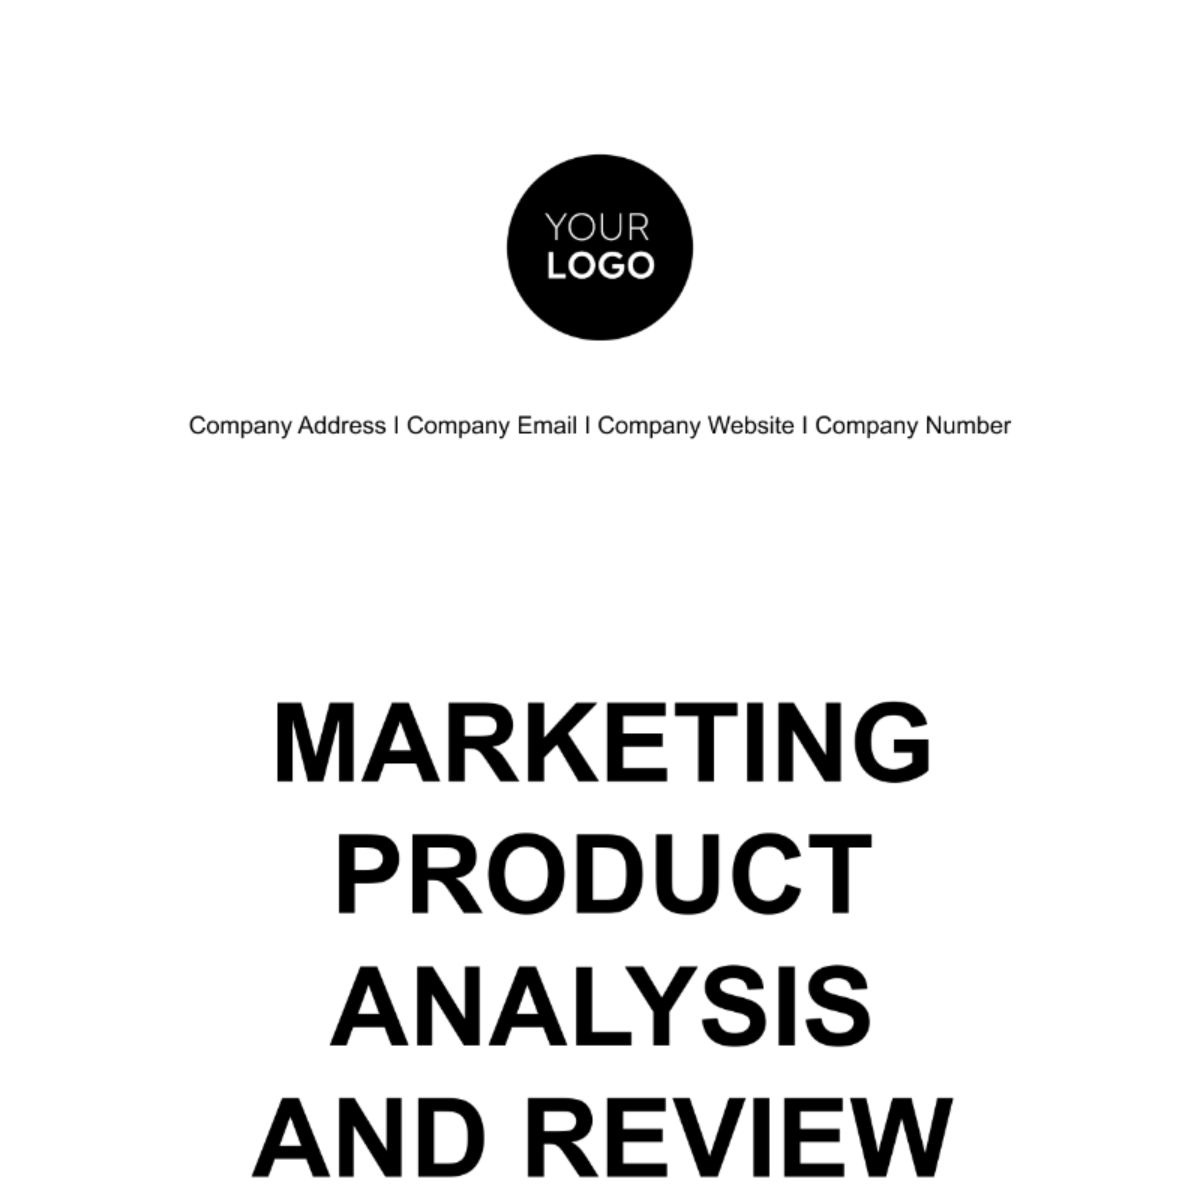 Marketing Product Analysis and Review Template